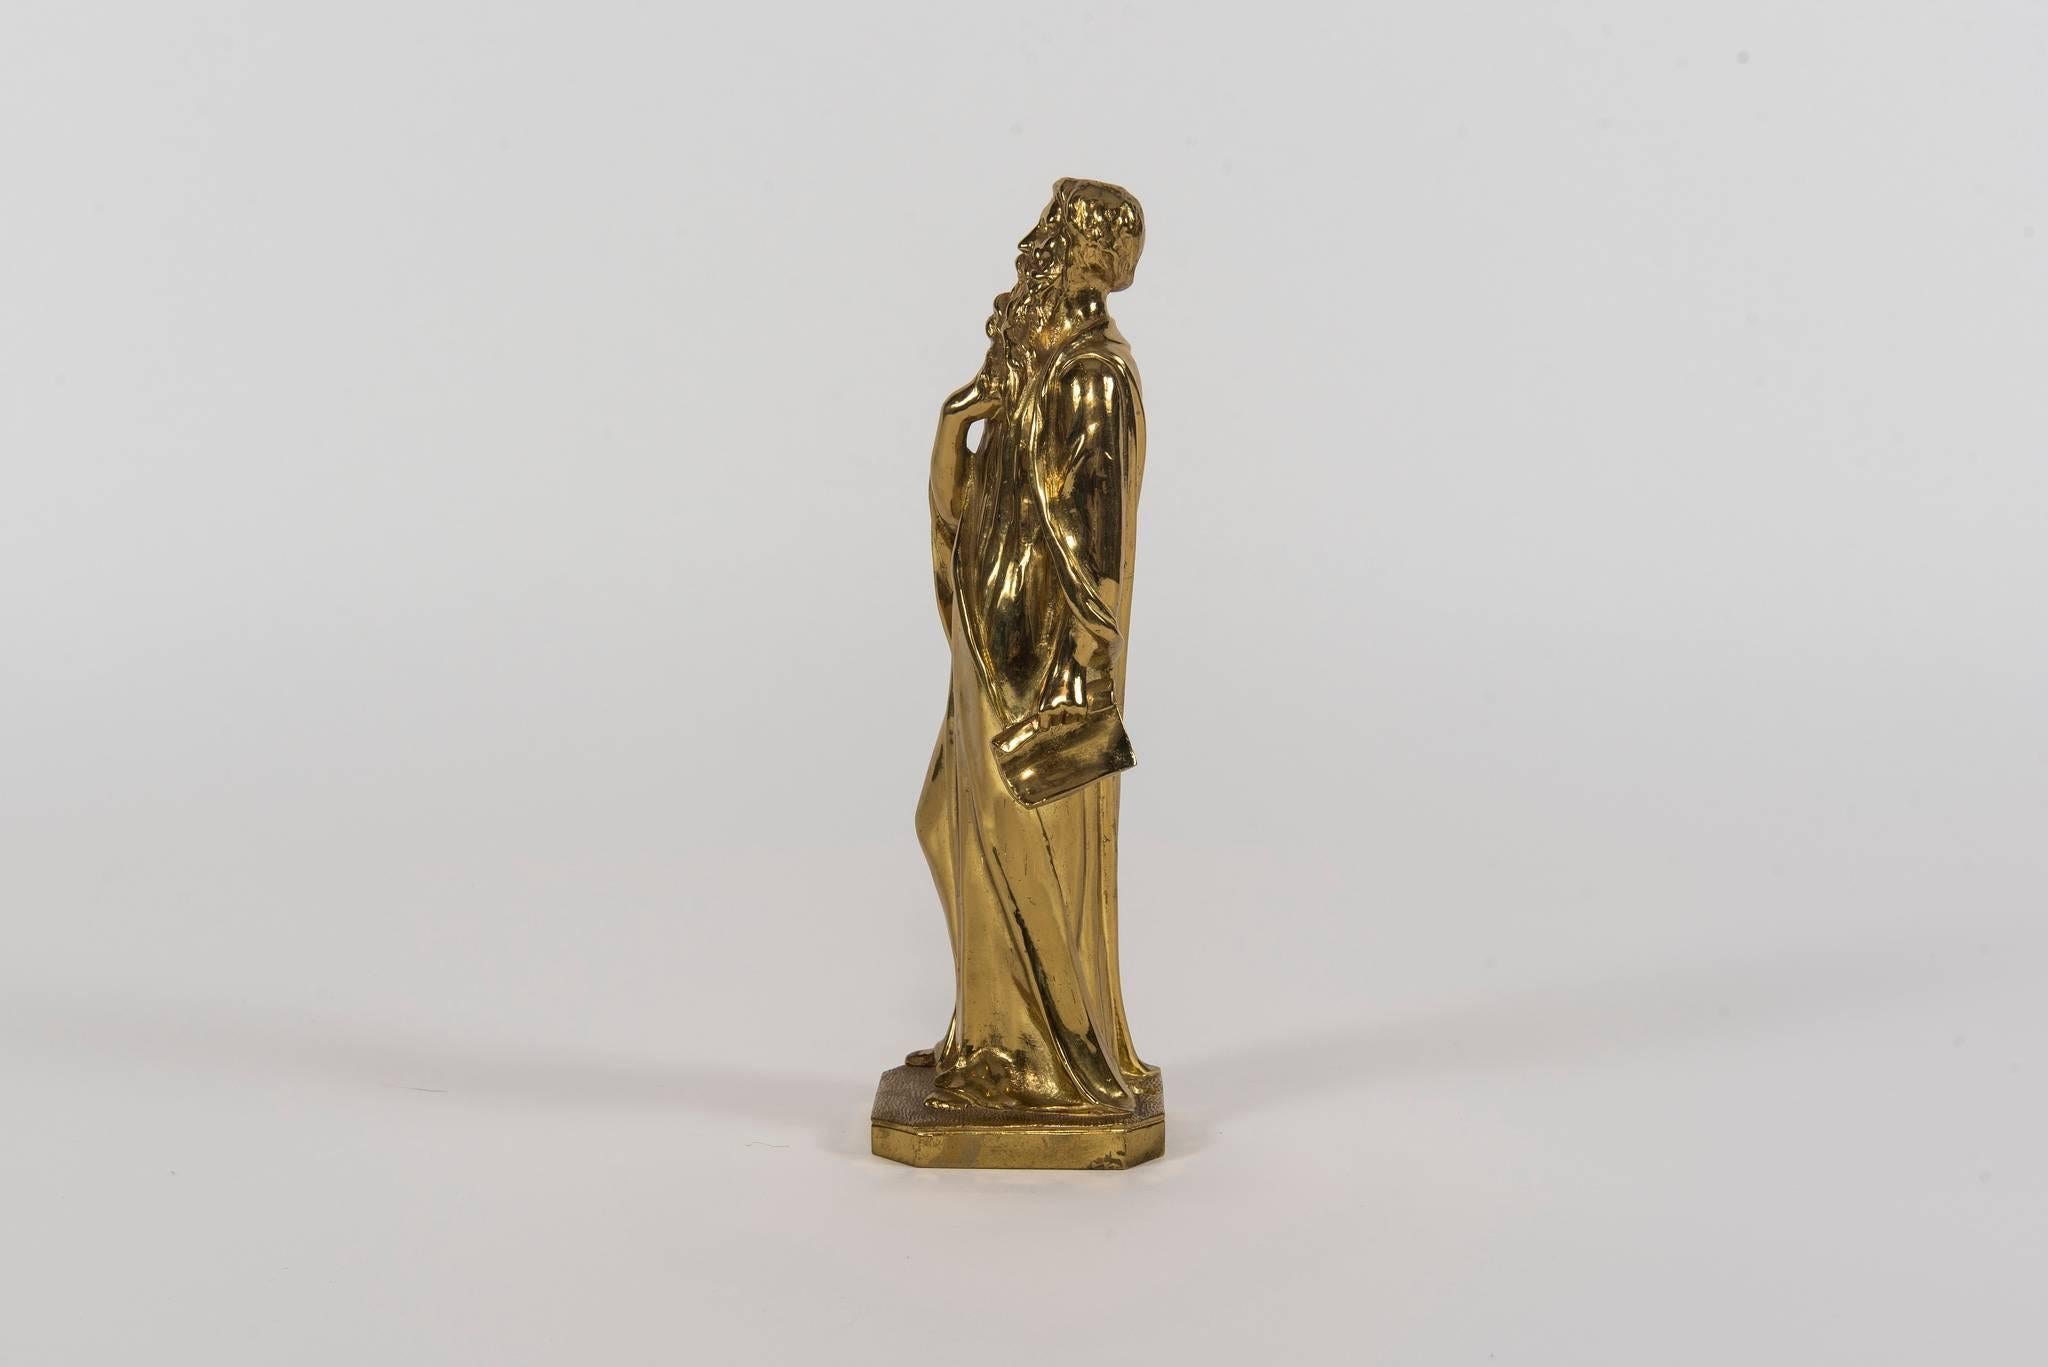 A late 19th-early 20th century gilt bronze scholar sculpture.